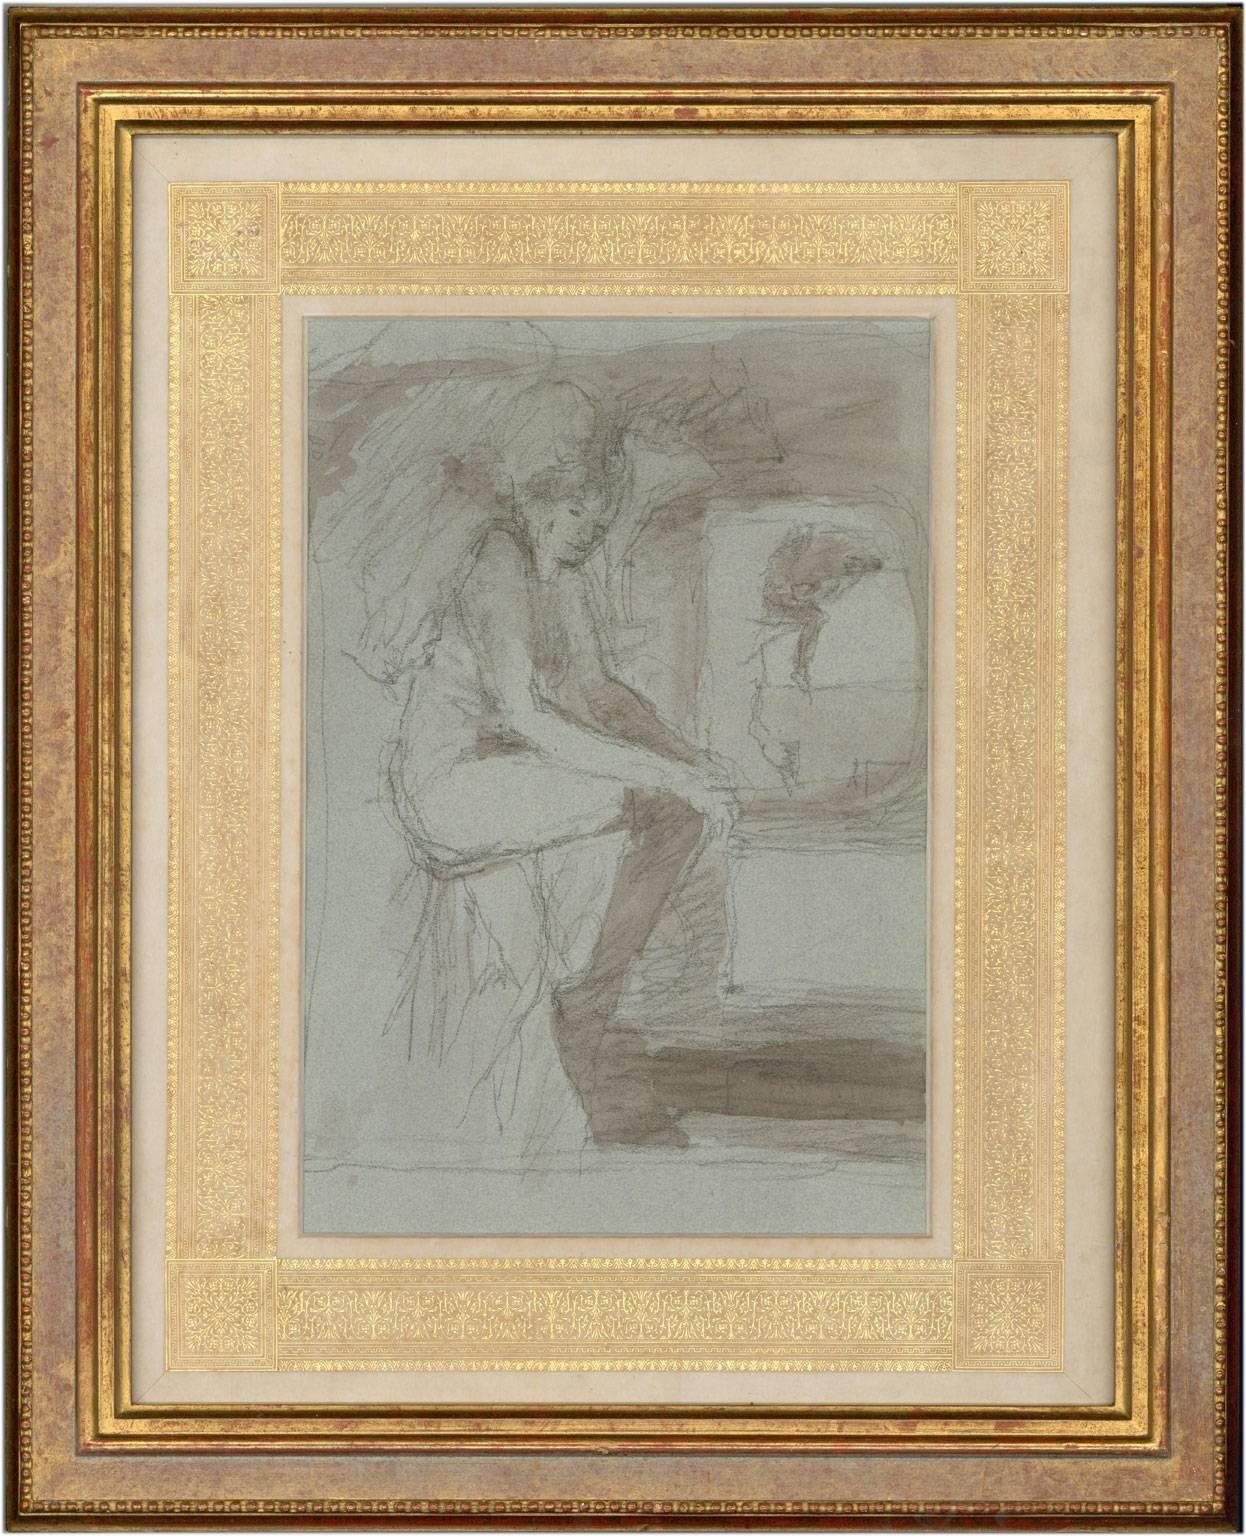 An expressive figurative interior study by the acclaimed British artist Bernard Dunstan (1920-2017) NEAC PRWA RA. Drawn in charcoal with wash, presented in a card mount with gold embossed detailing and in a gilt mount with beaded detailing.